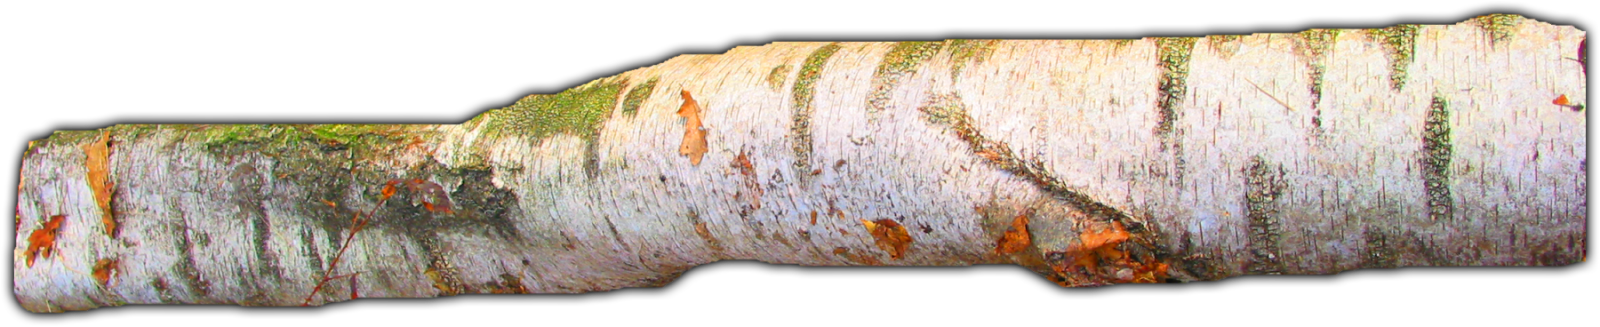 A Close-up Of A Tree Trunk